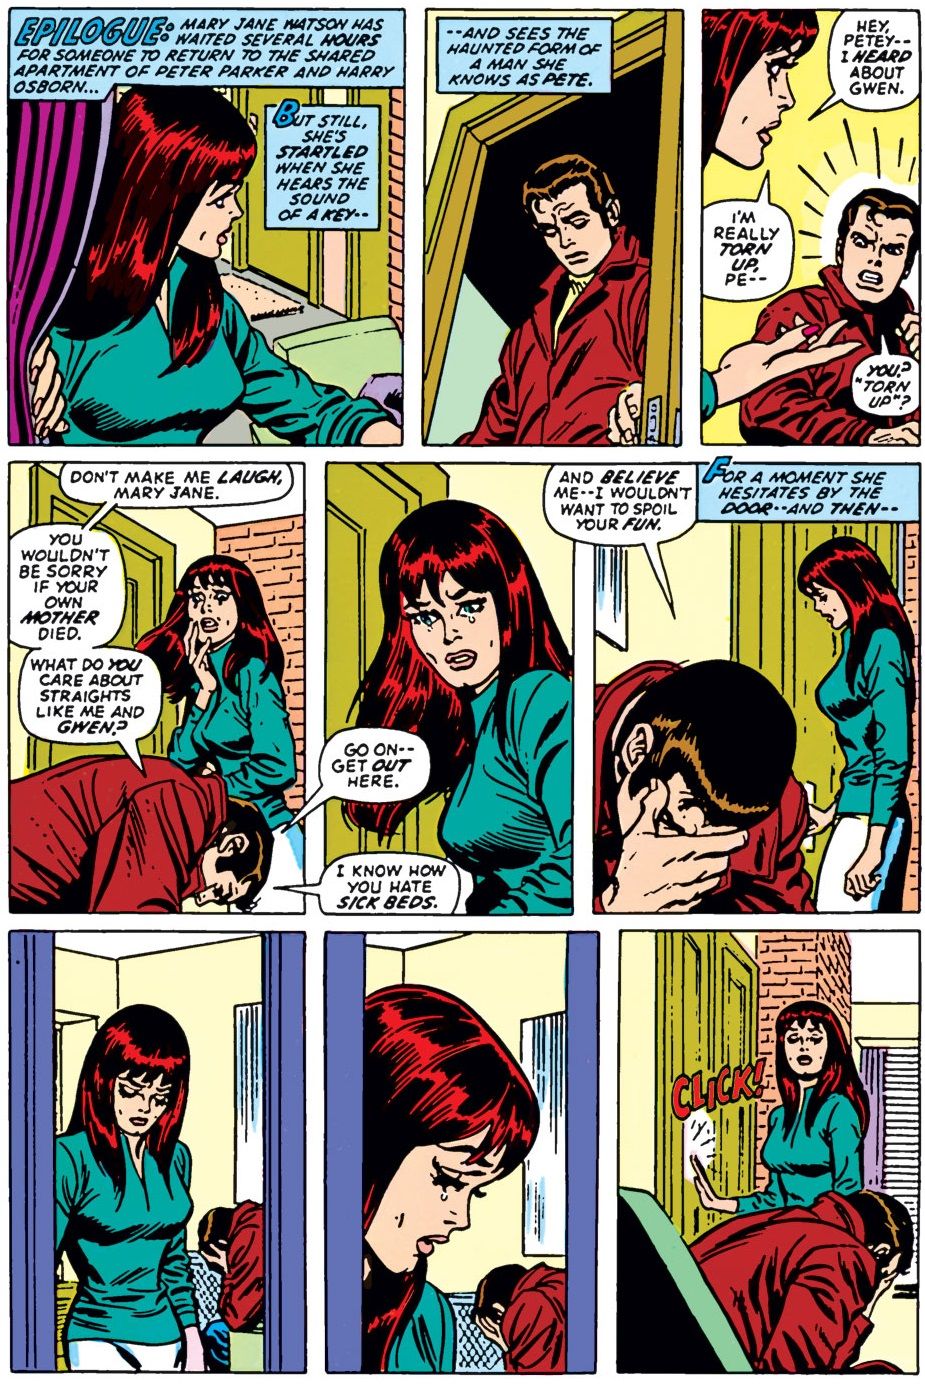 Mary Jane puts up with Peter's attacks to help him grieve Gwen Stacy's death